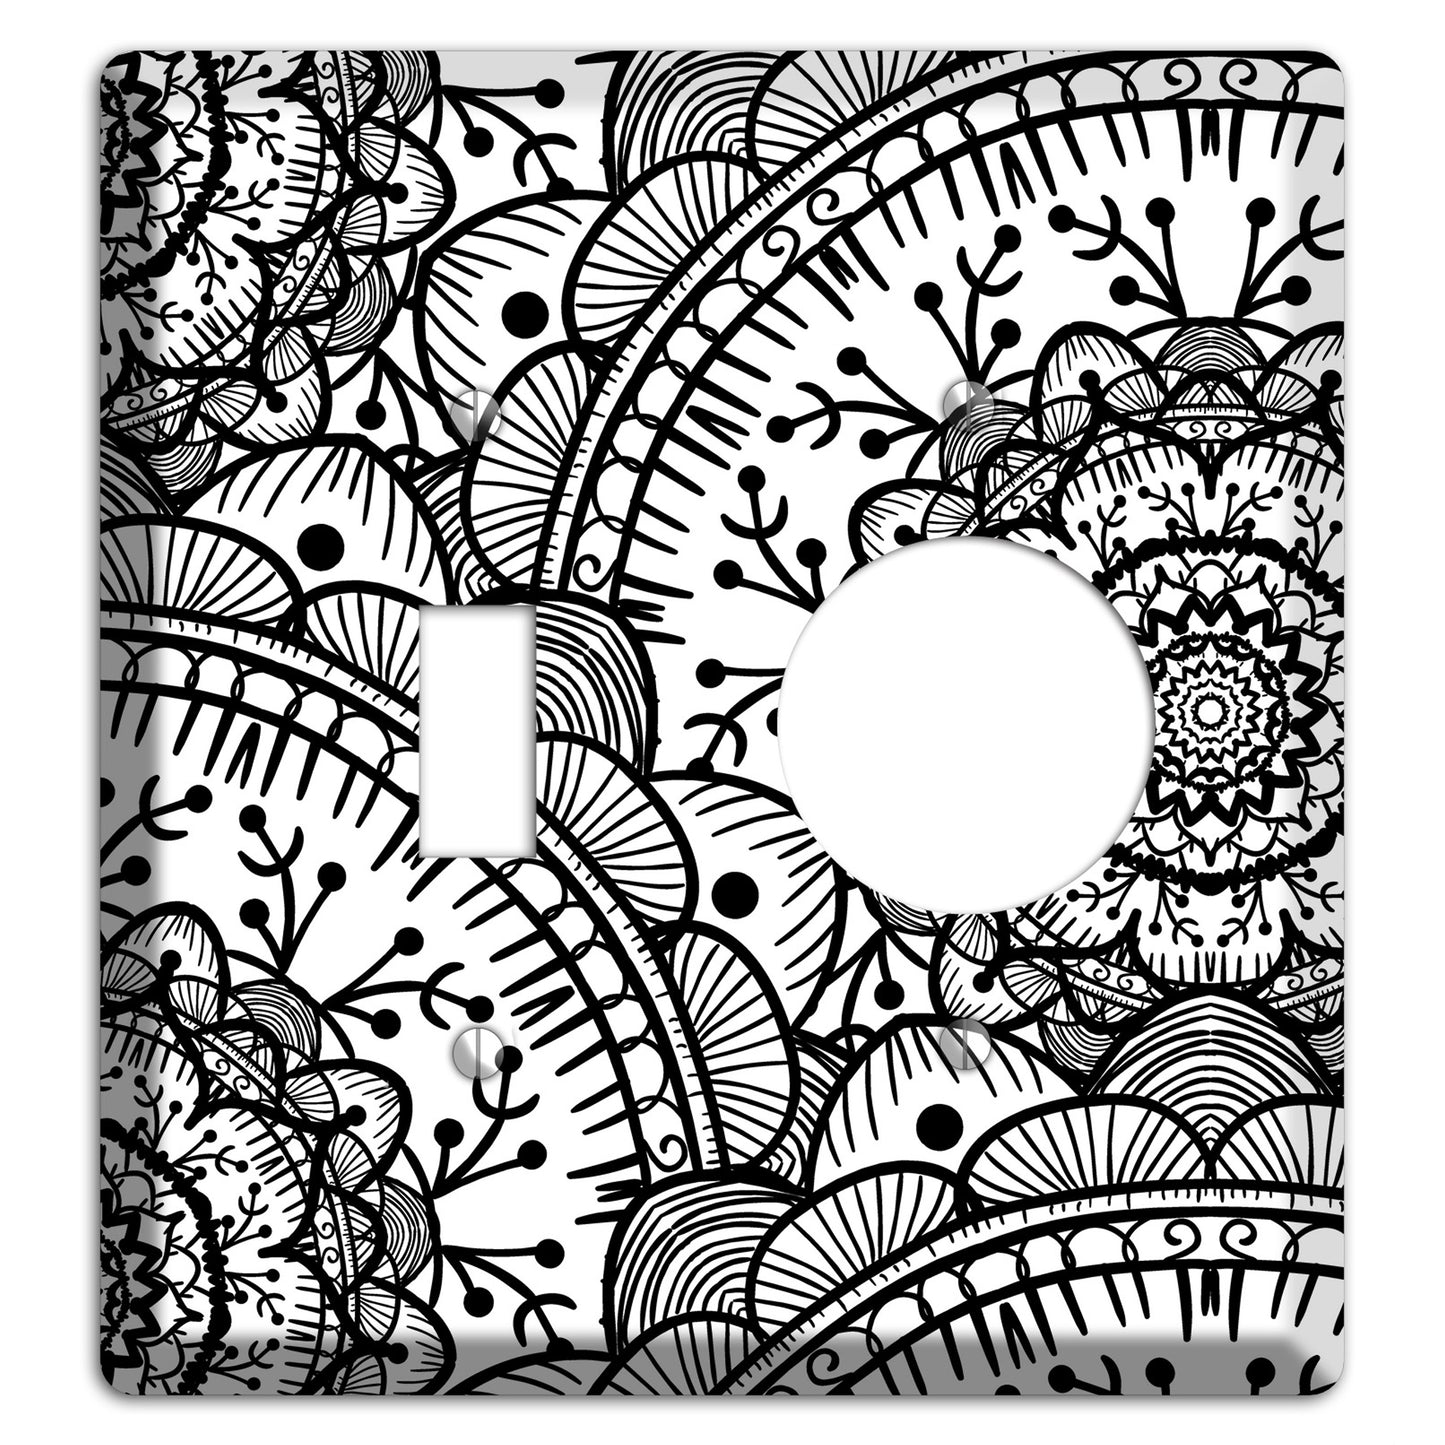 Mandala Black and White Style Q Cover Plates Toggle / Receptacle Wallplate